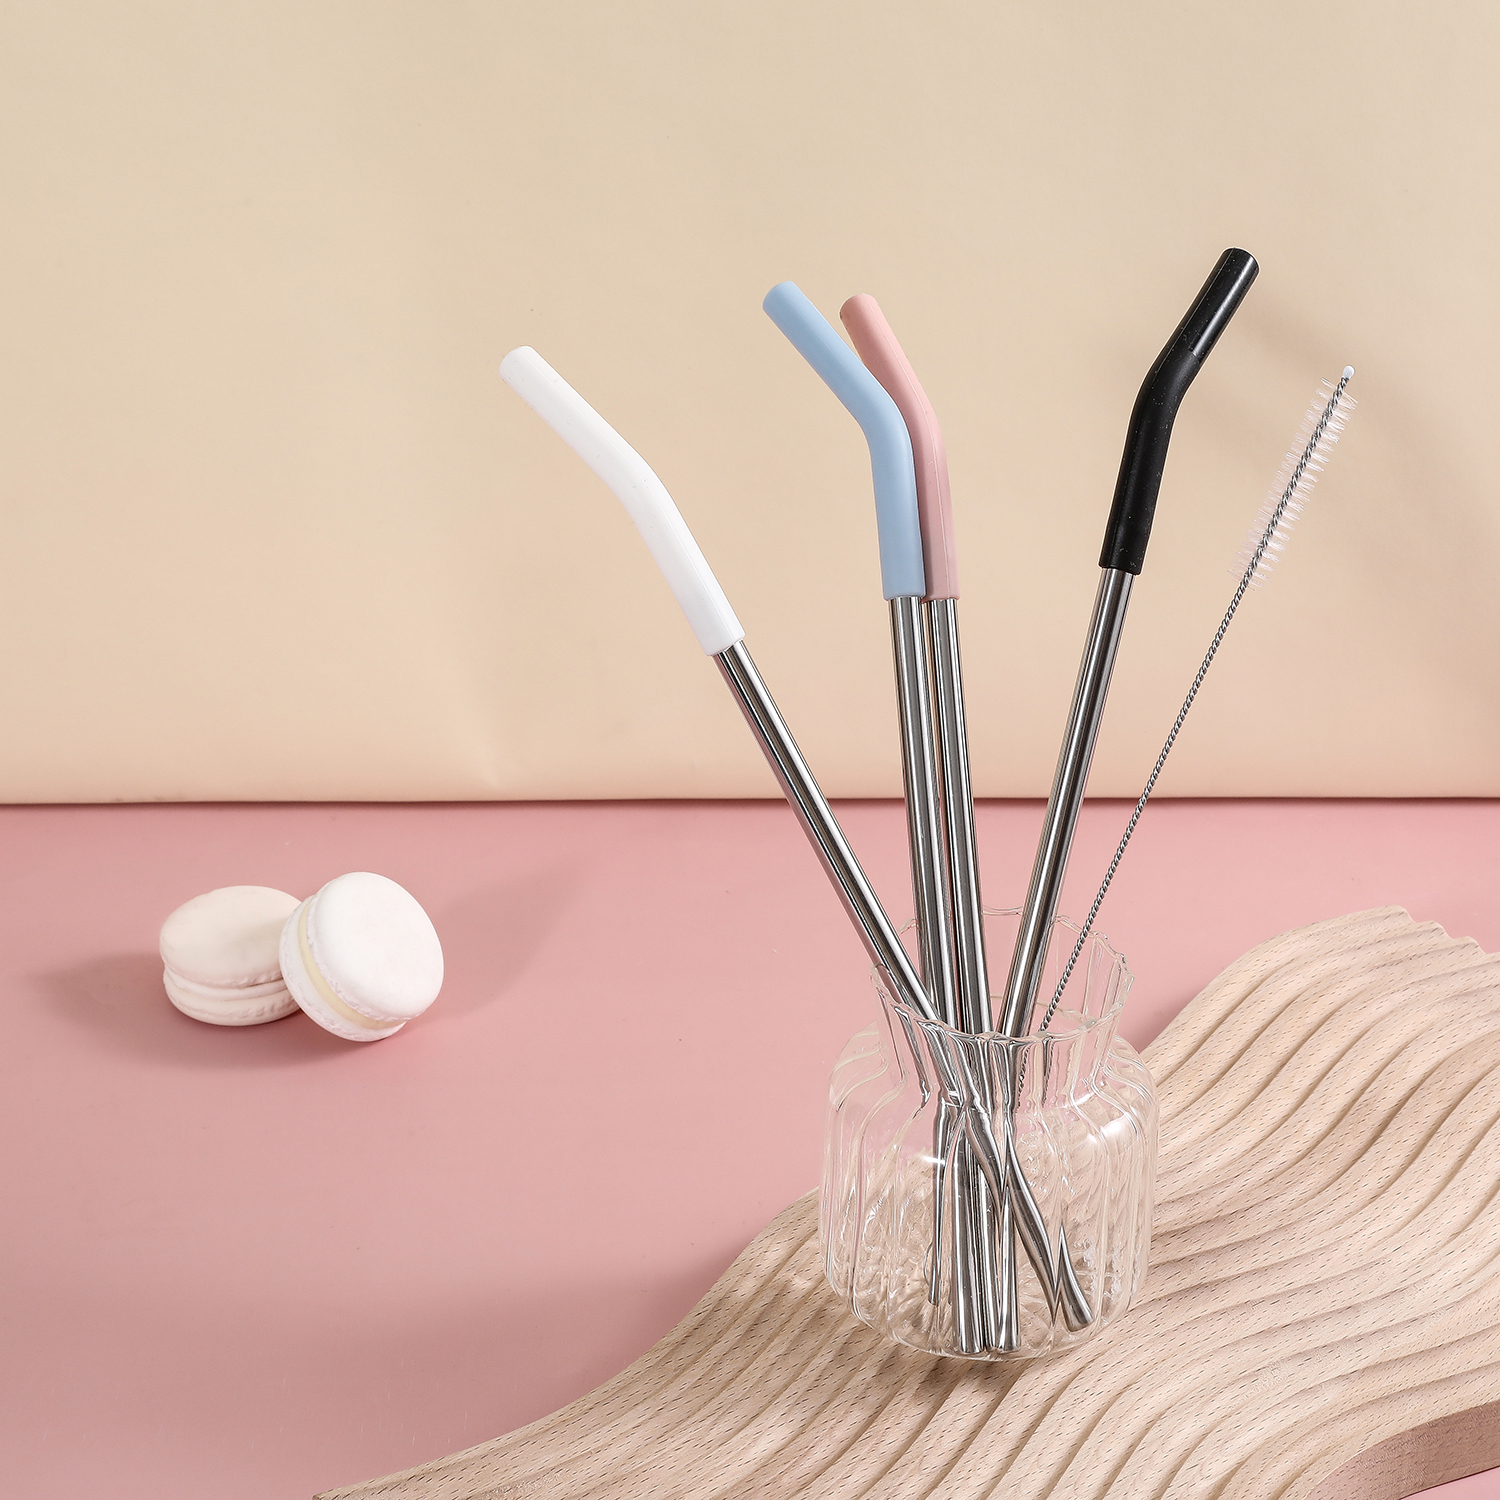 Mainstays Stainless Steel Straw Set，White，Black，Pink, Blue - image 2 of 7